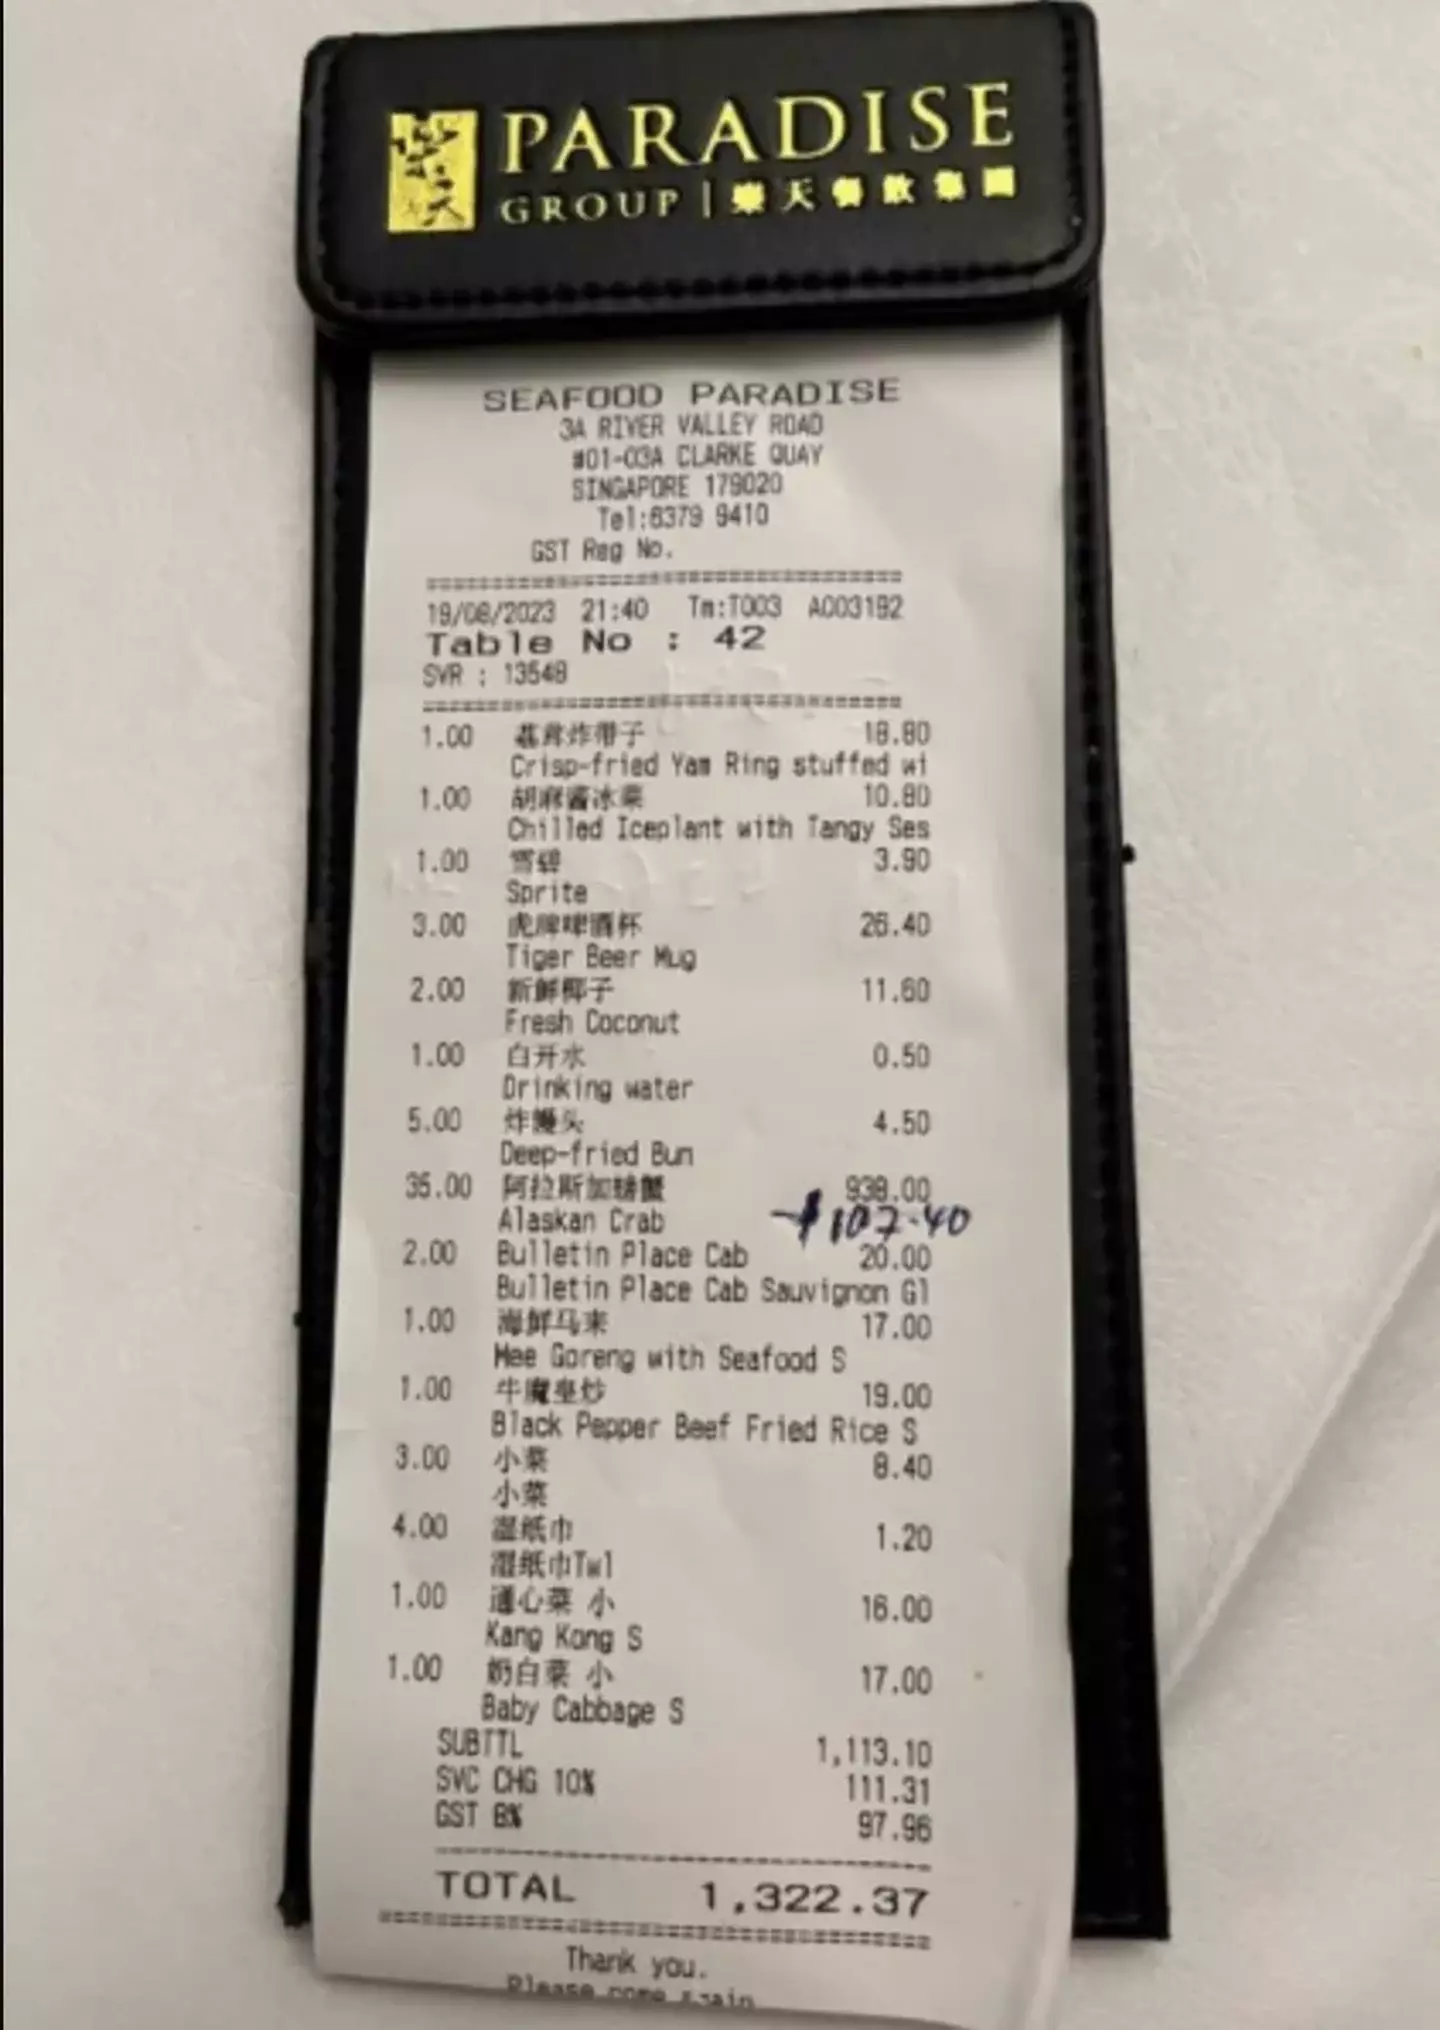 That's quite the bill.